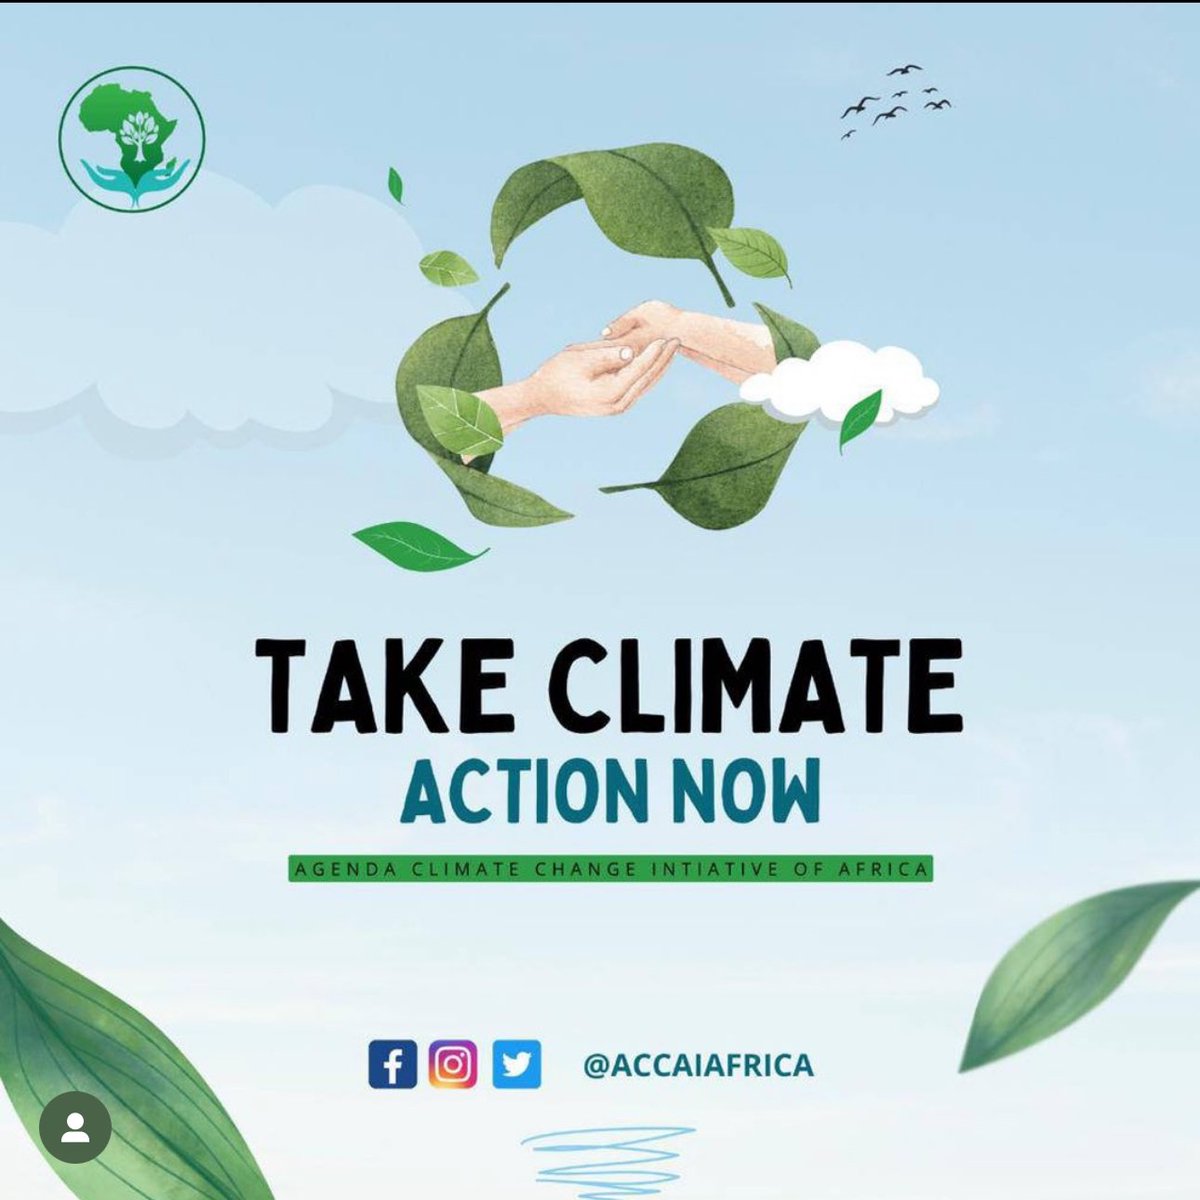 Every action counts. From reducing waste to supporting renewable energy, let's join hands in safeguarding our planet. Together, we can make a difference. 🌍 #ClimateAction